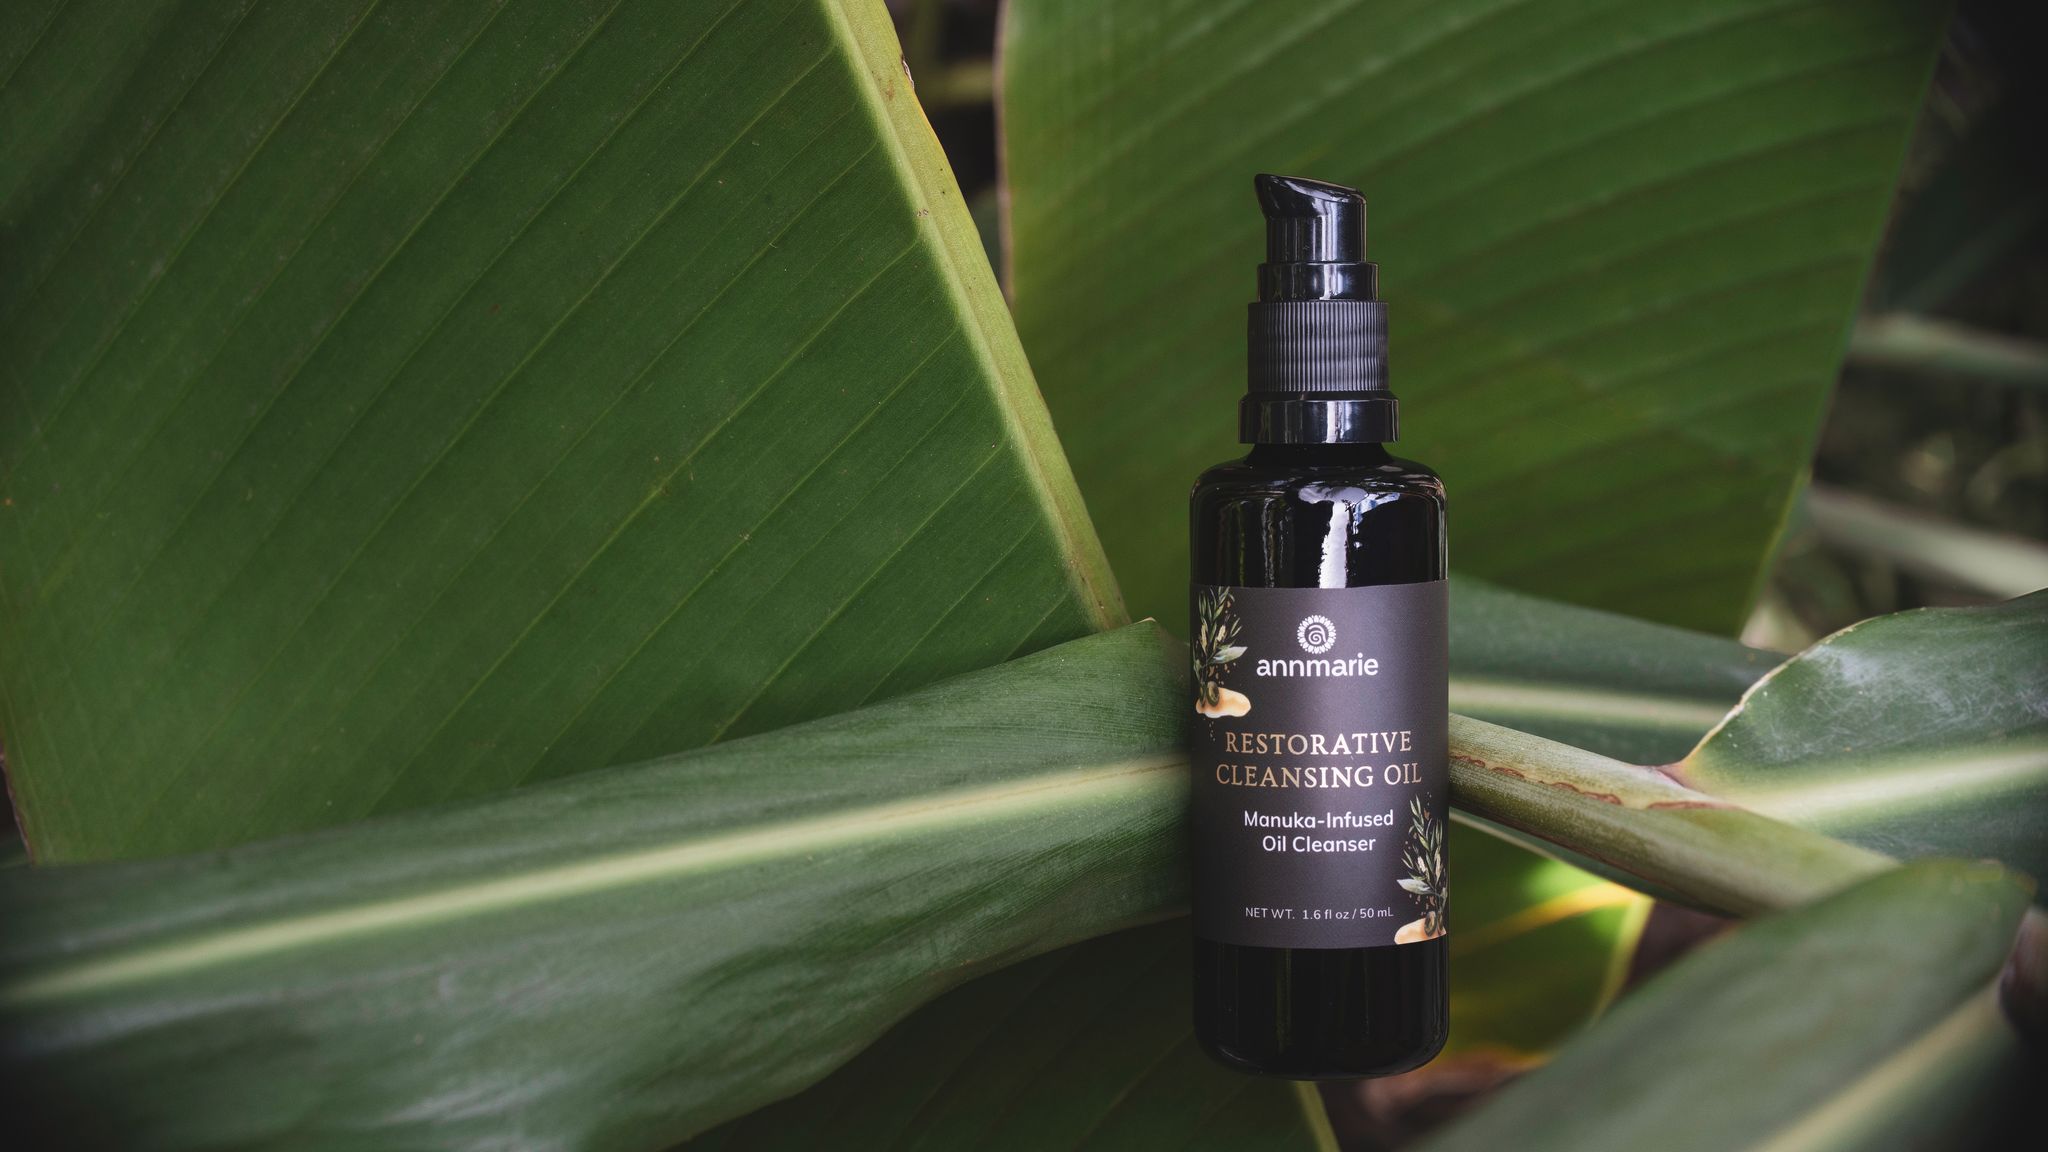 Introducing: The Restorative Cleansing Oil 1